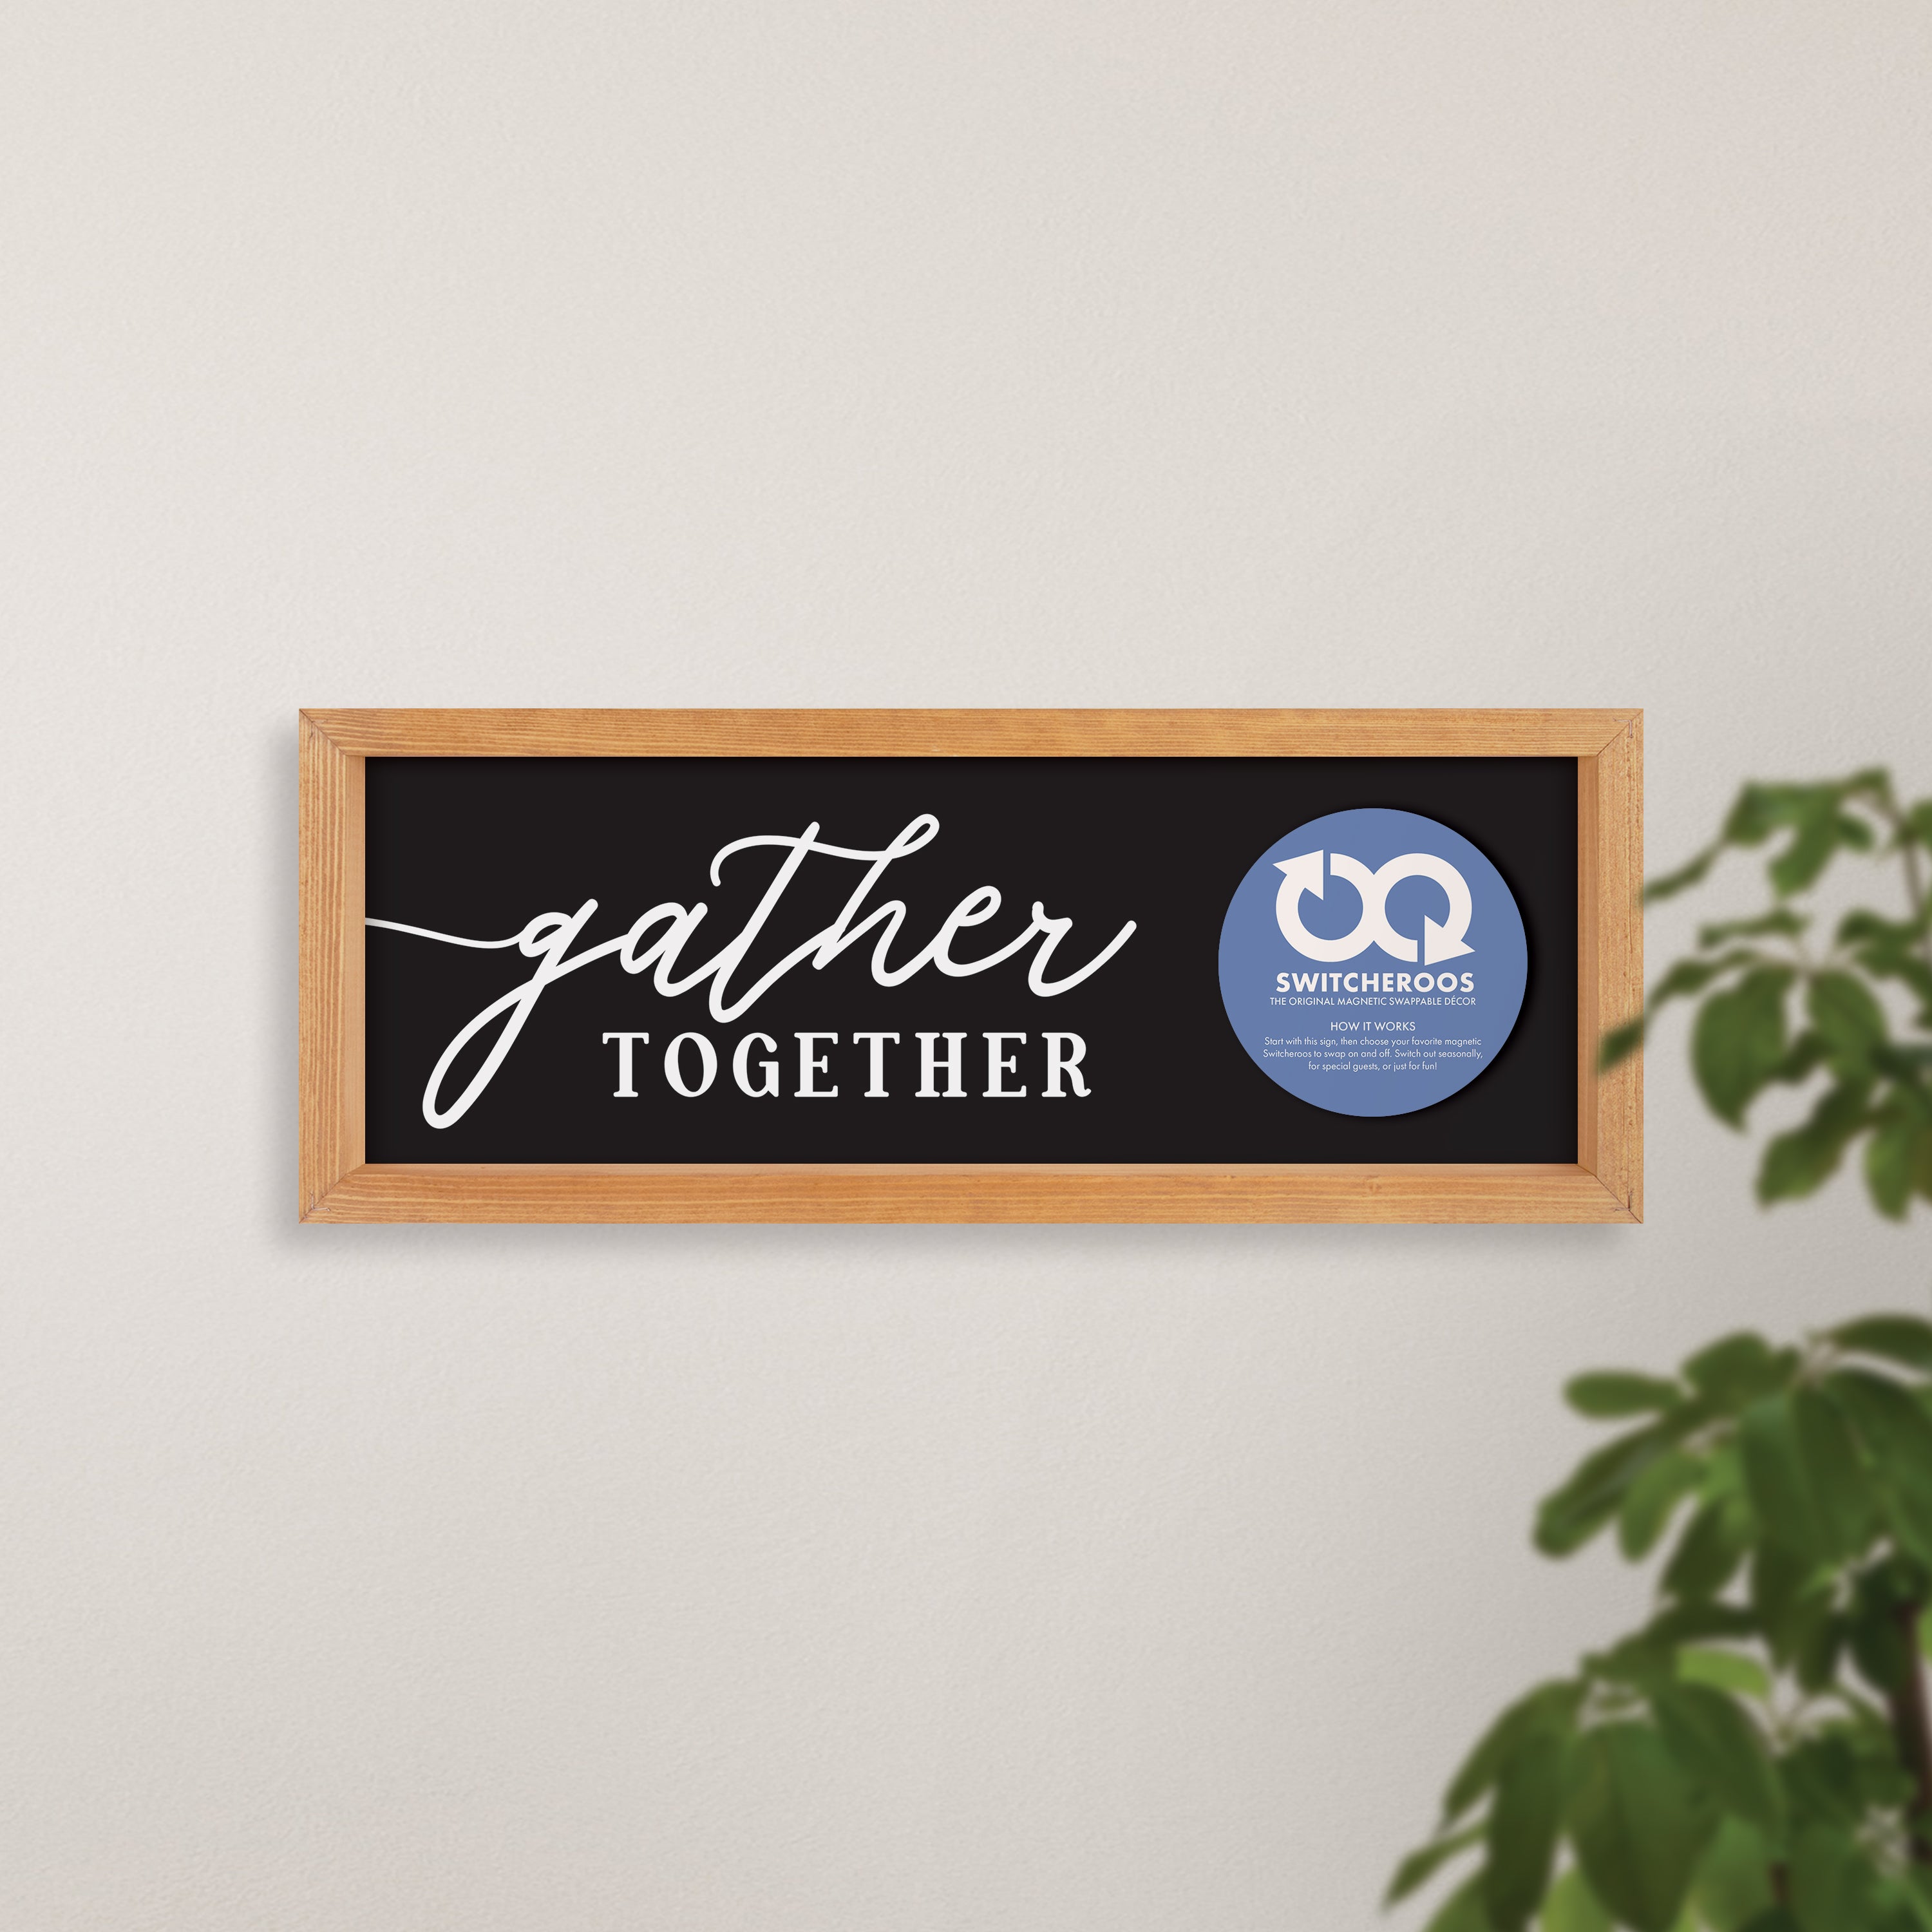 Gather Together Switcheroo Sign